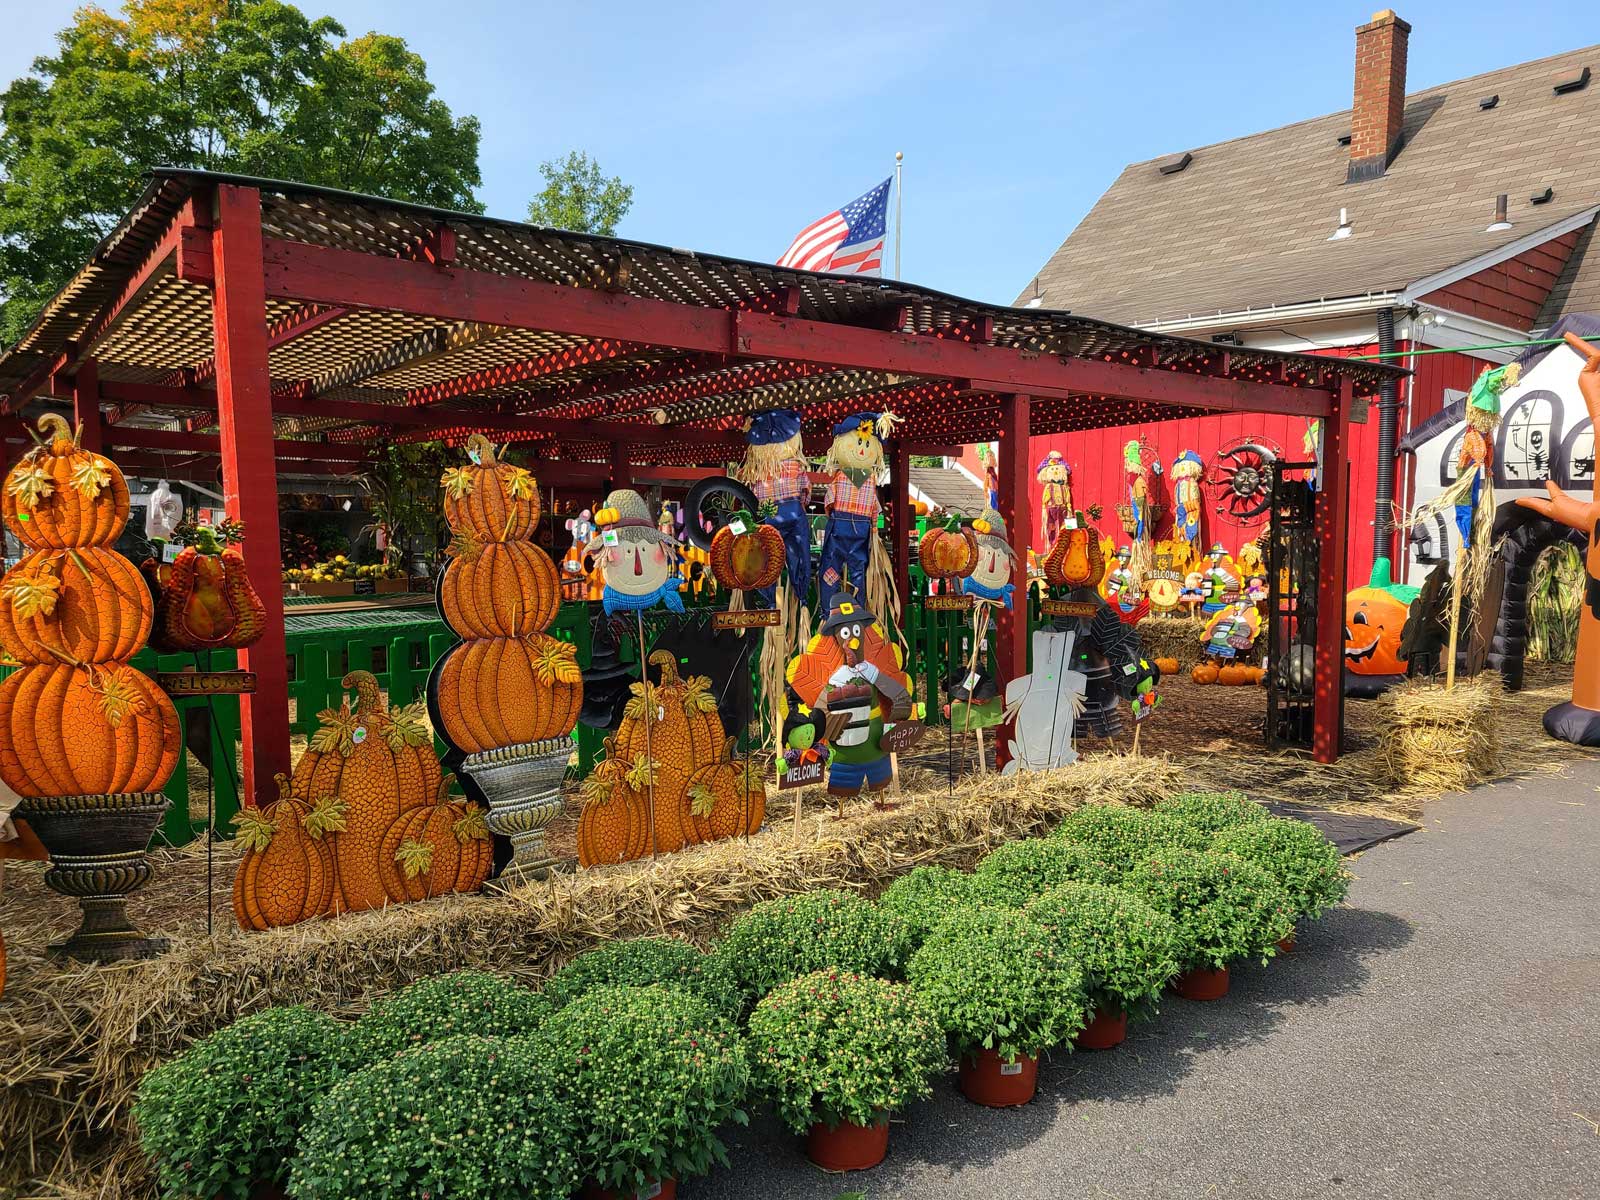 Chrysanthemums and Decor at Goffle brook Farms in RIdgewood